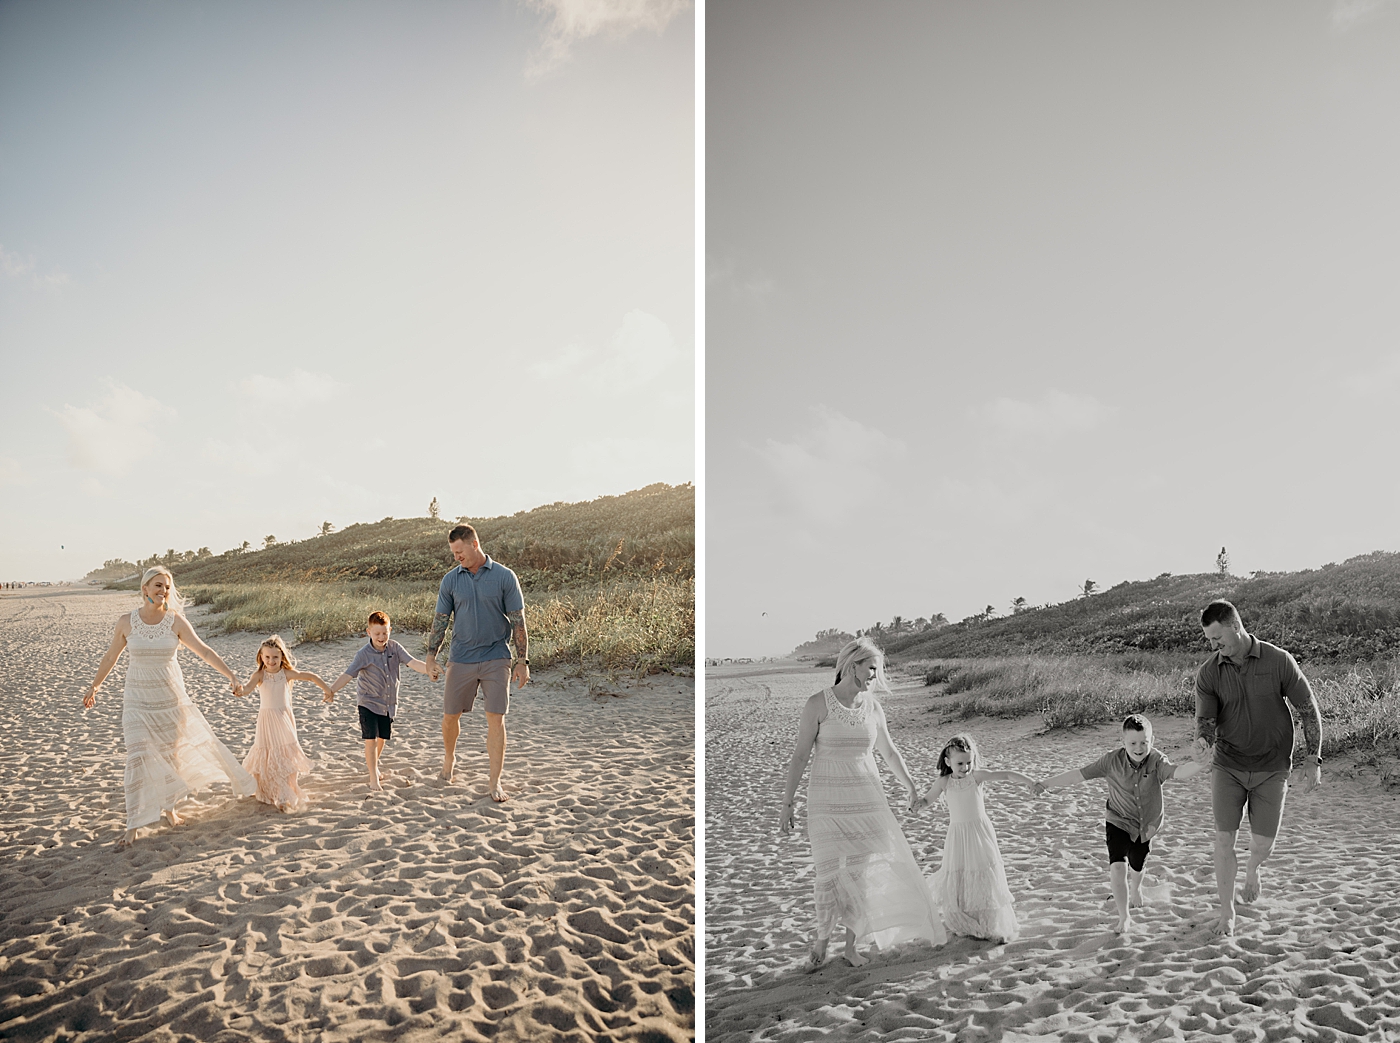 B&W and colored portrait of family walking on beach together Ocean Ridge Hammock Park Family Photography by South Florida Family Photographer Maggie Alvarez Photography